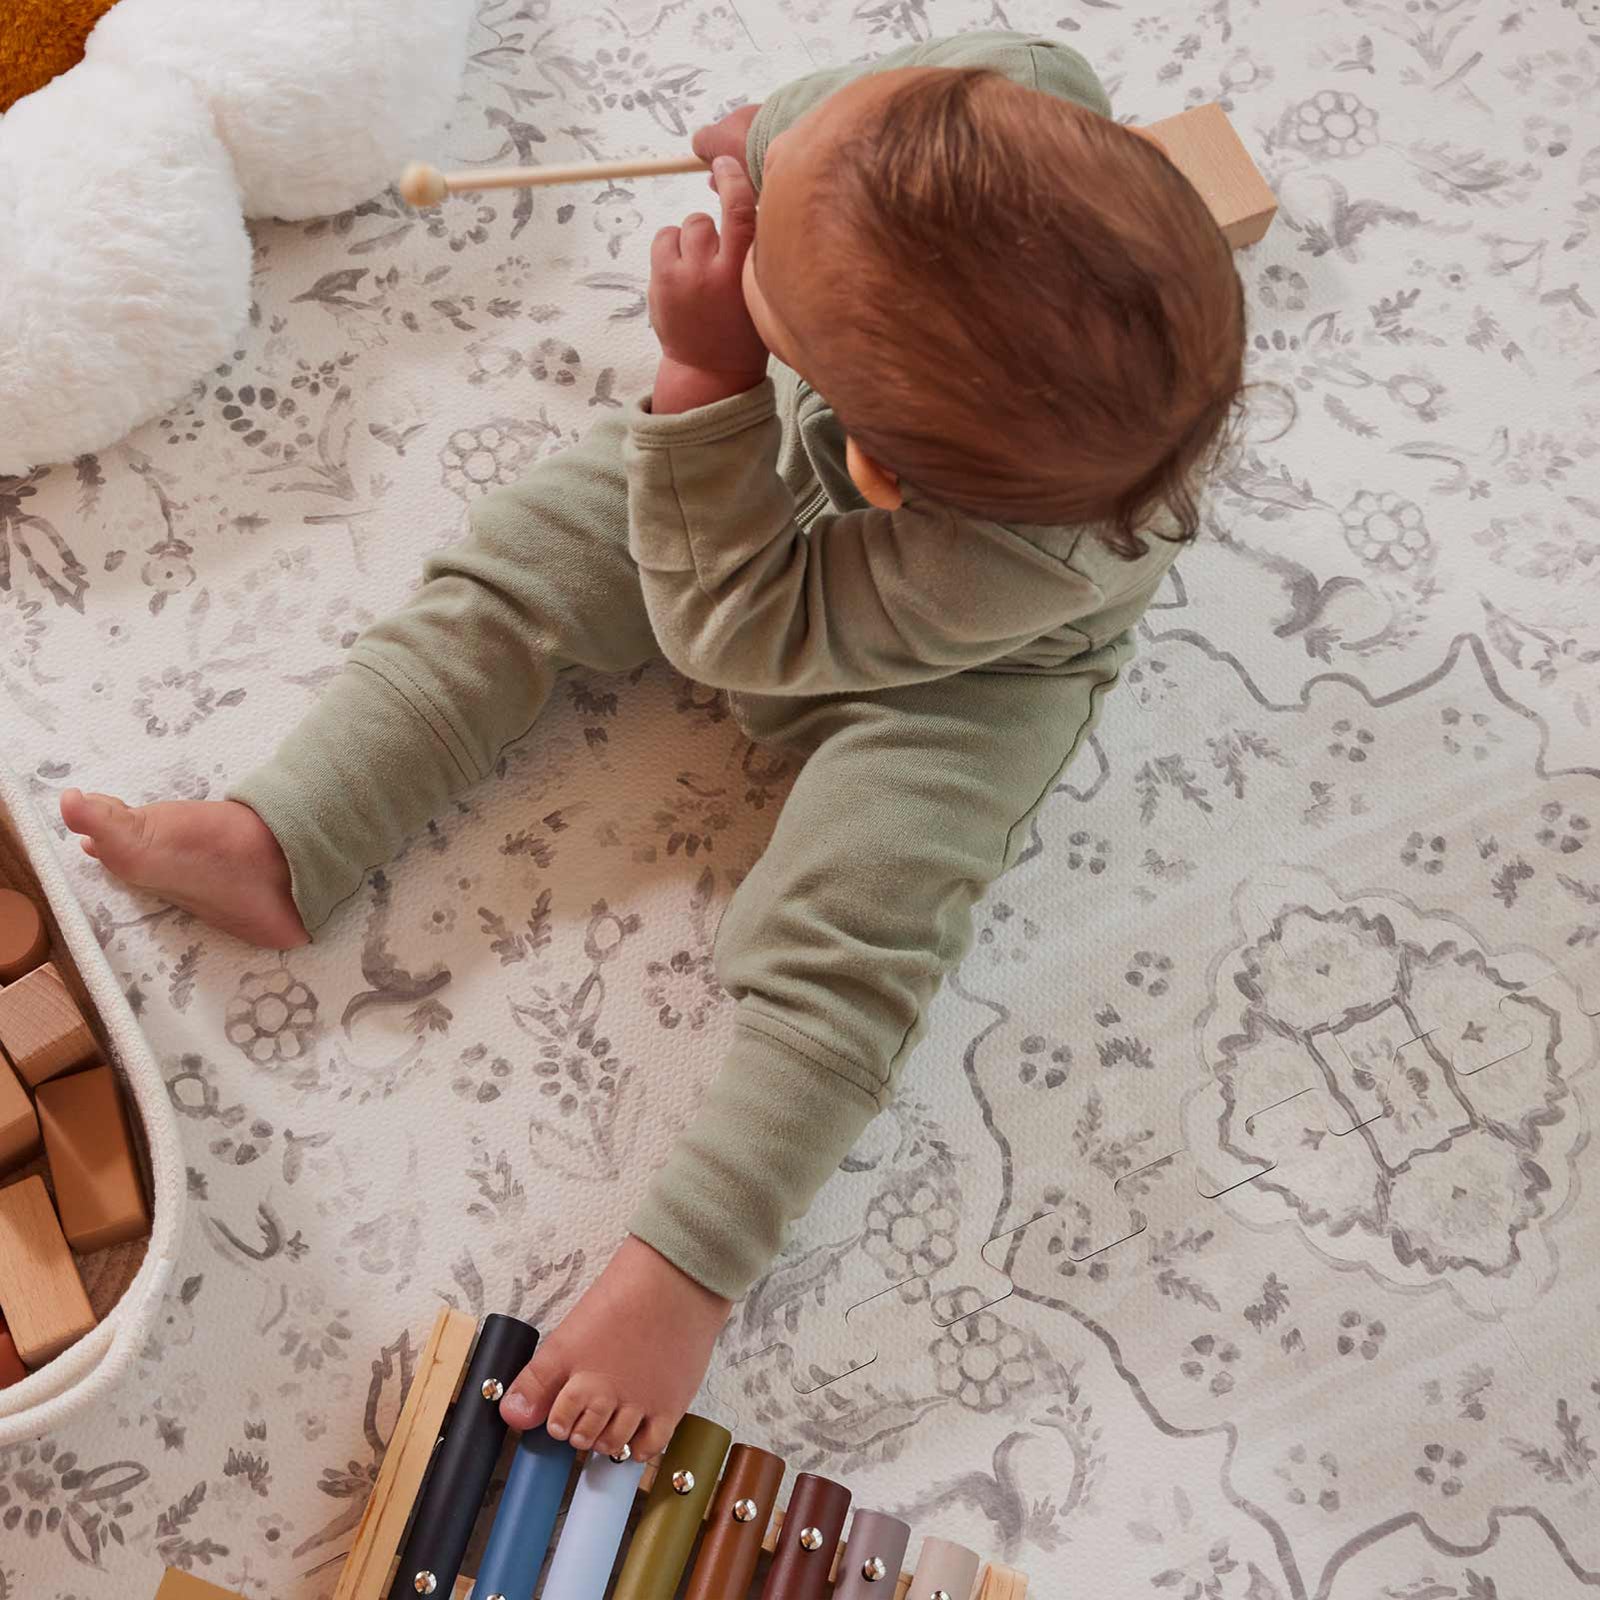 Emile latte neutral floral play mat shown from above with baby boy sitting in front of a plush toy, basket of wooden blocks, and a toy xylophone